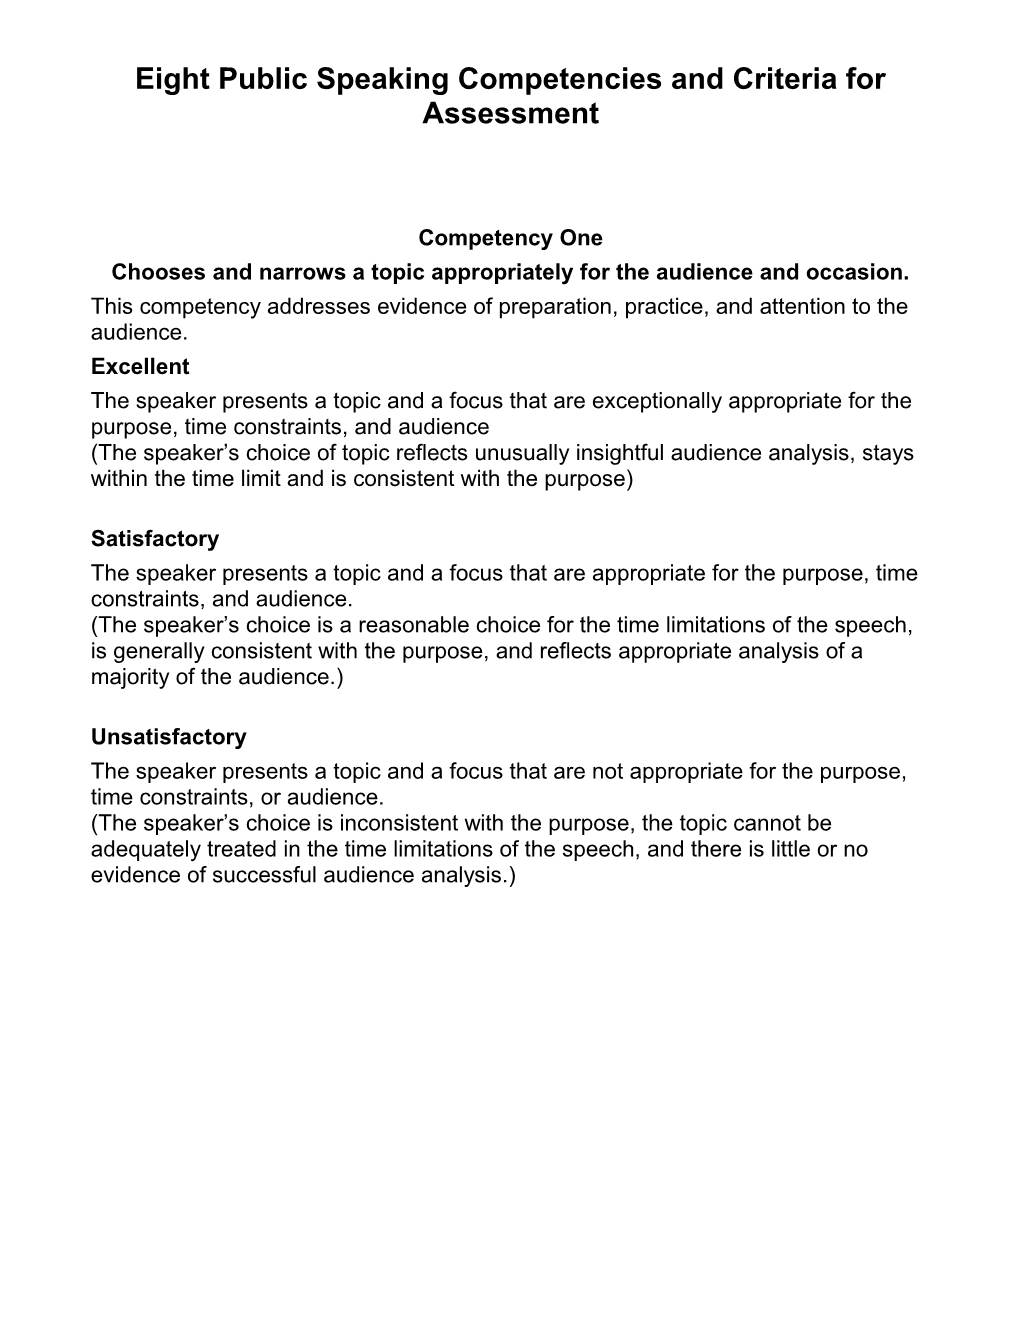 Eight Public Speaking Competencies and Criteria for Assessment